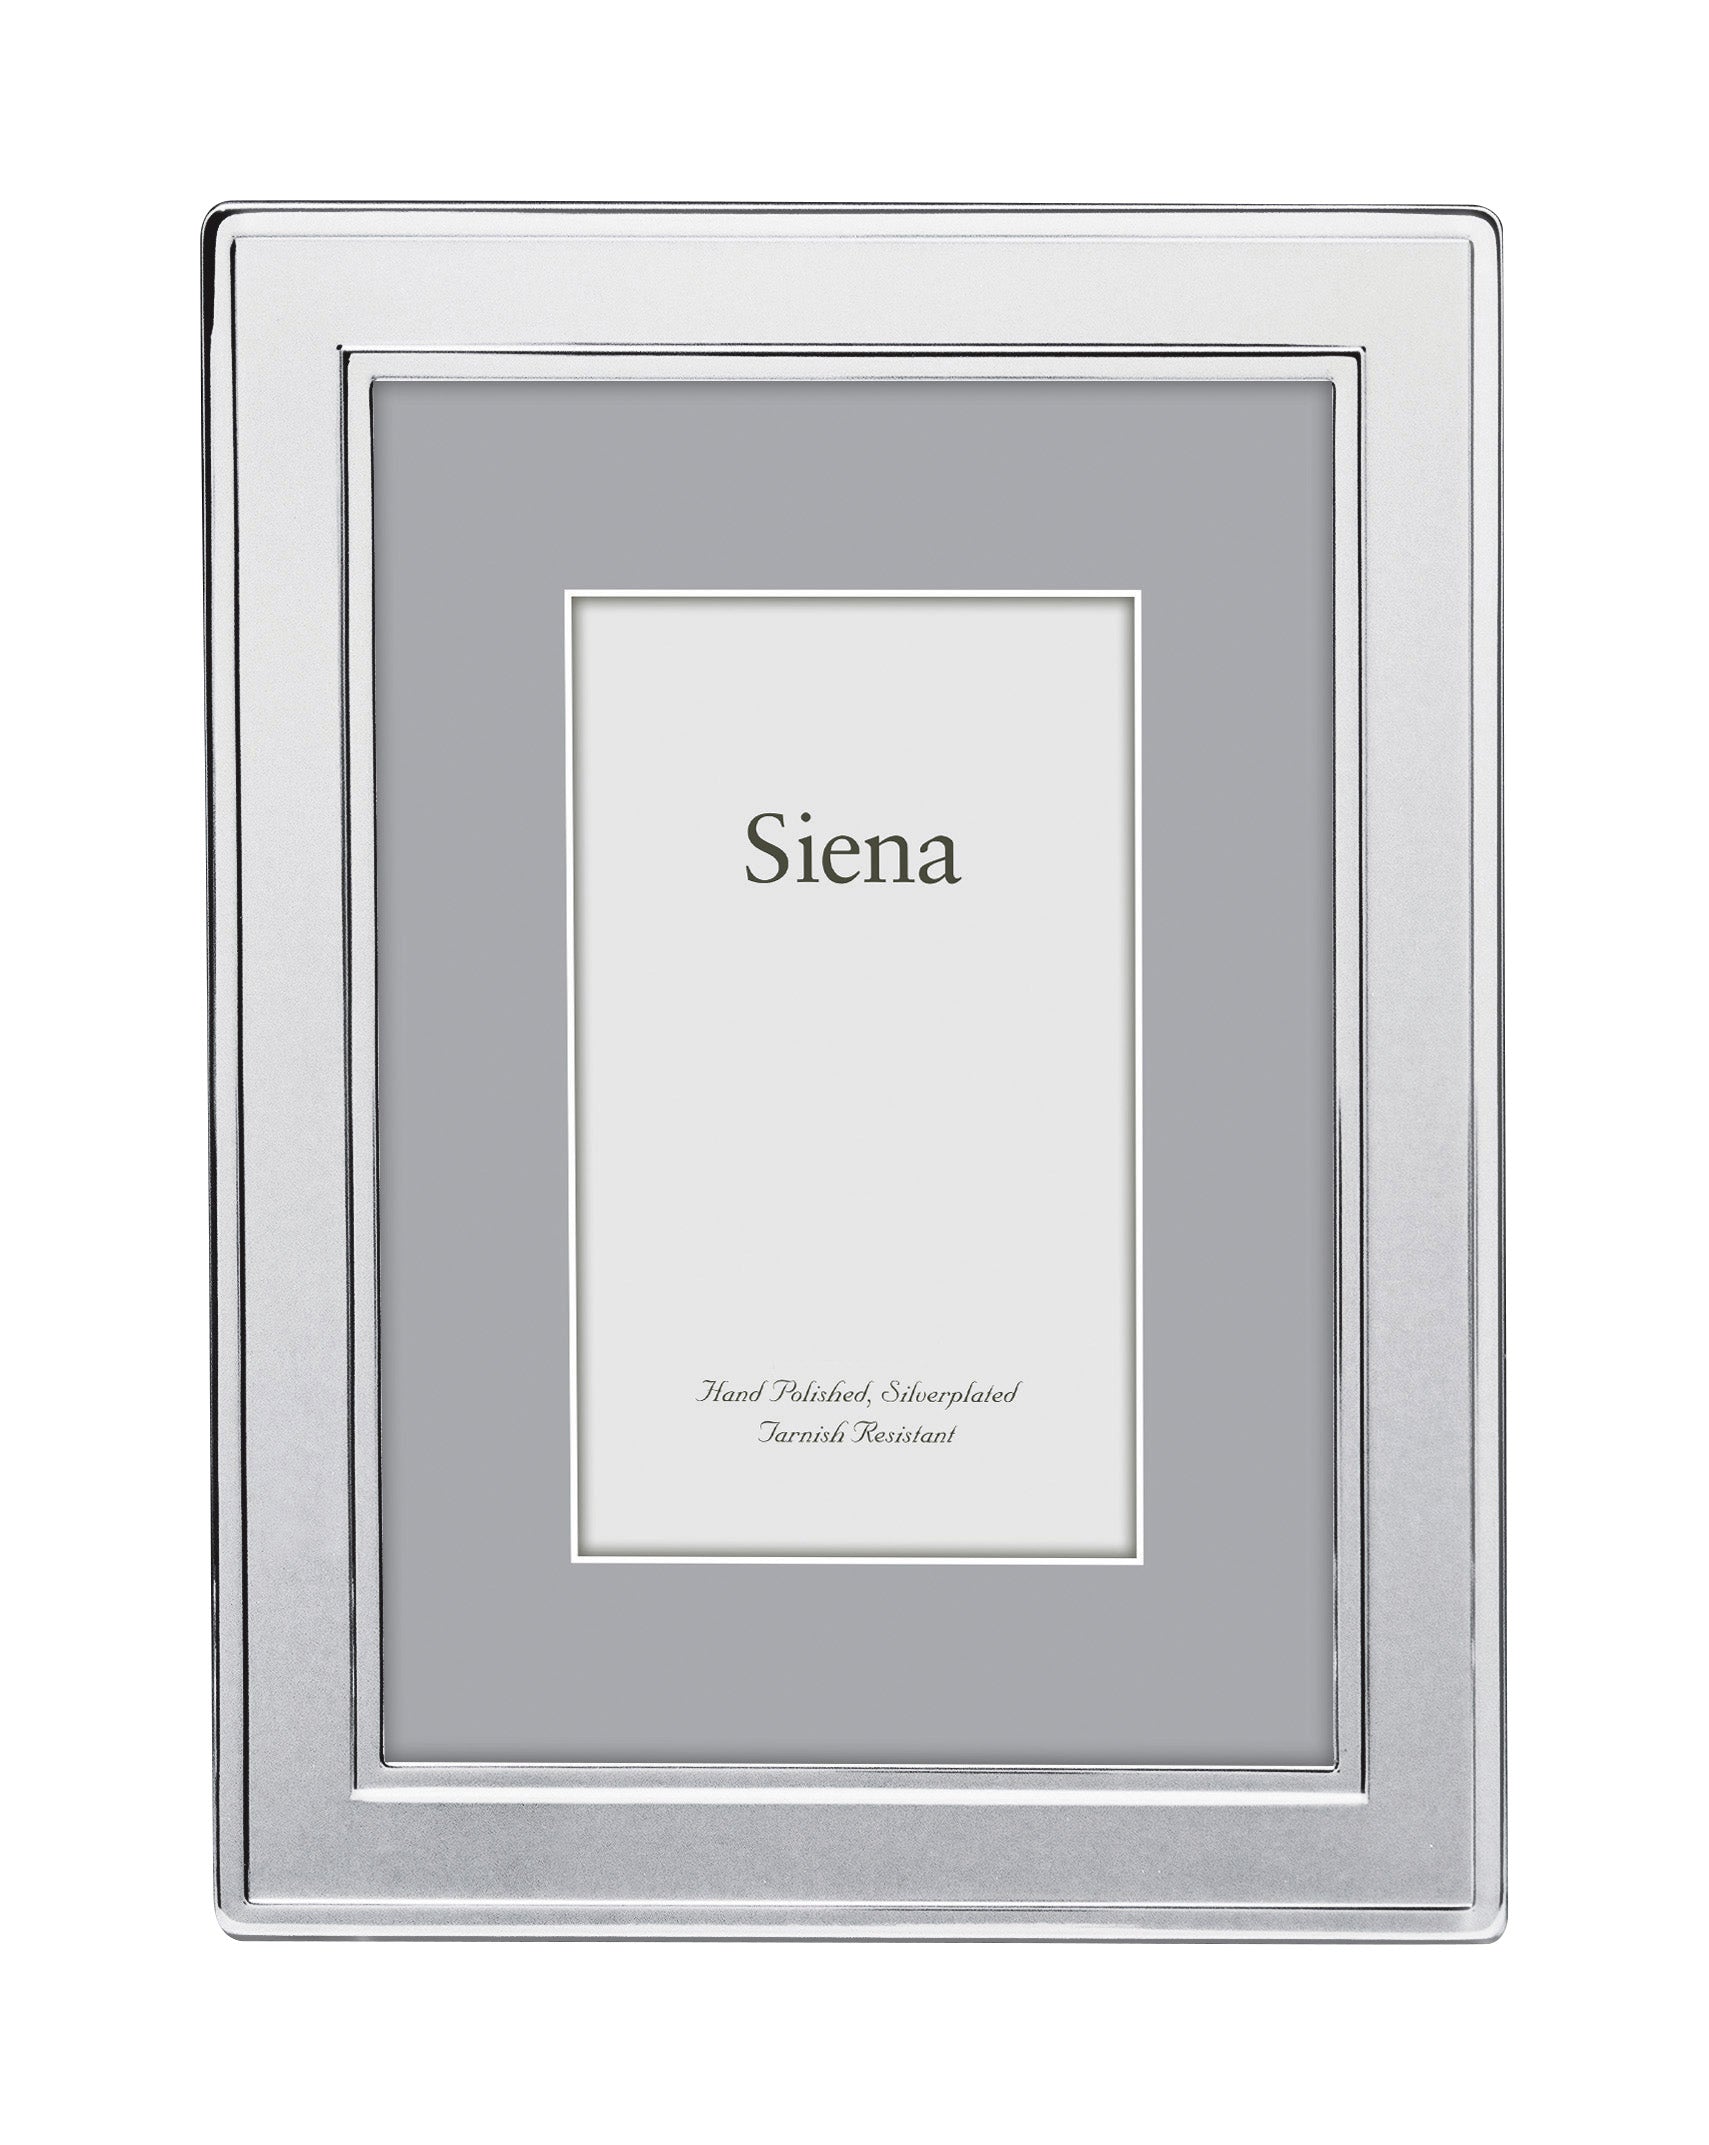 4 x 6 Silver-Plate Frame with Double Border